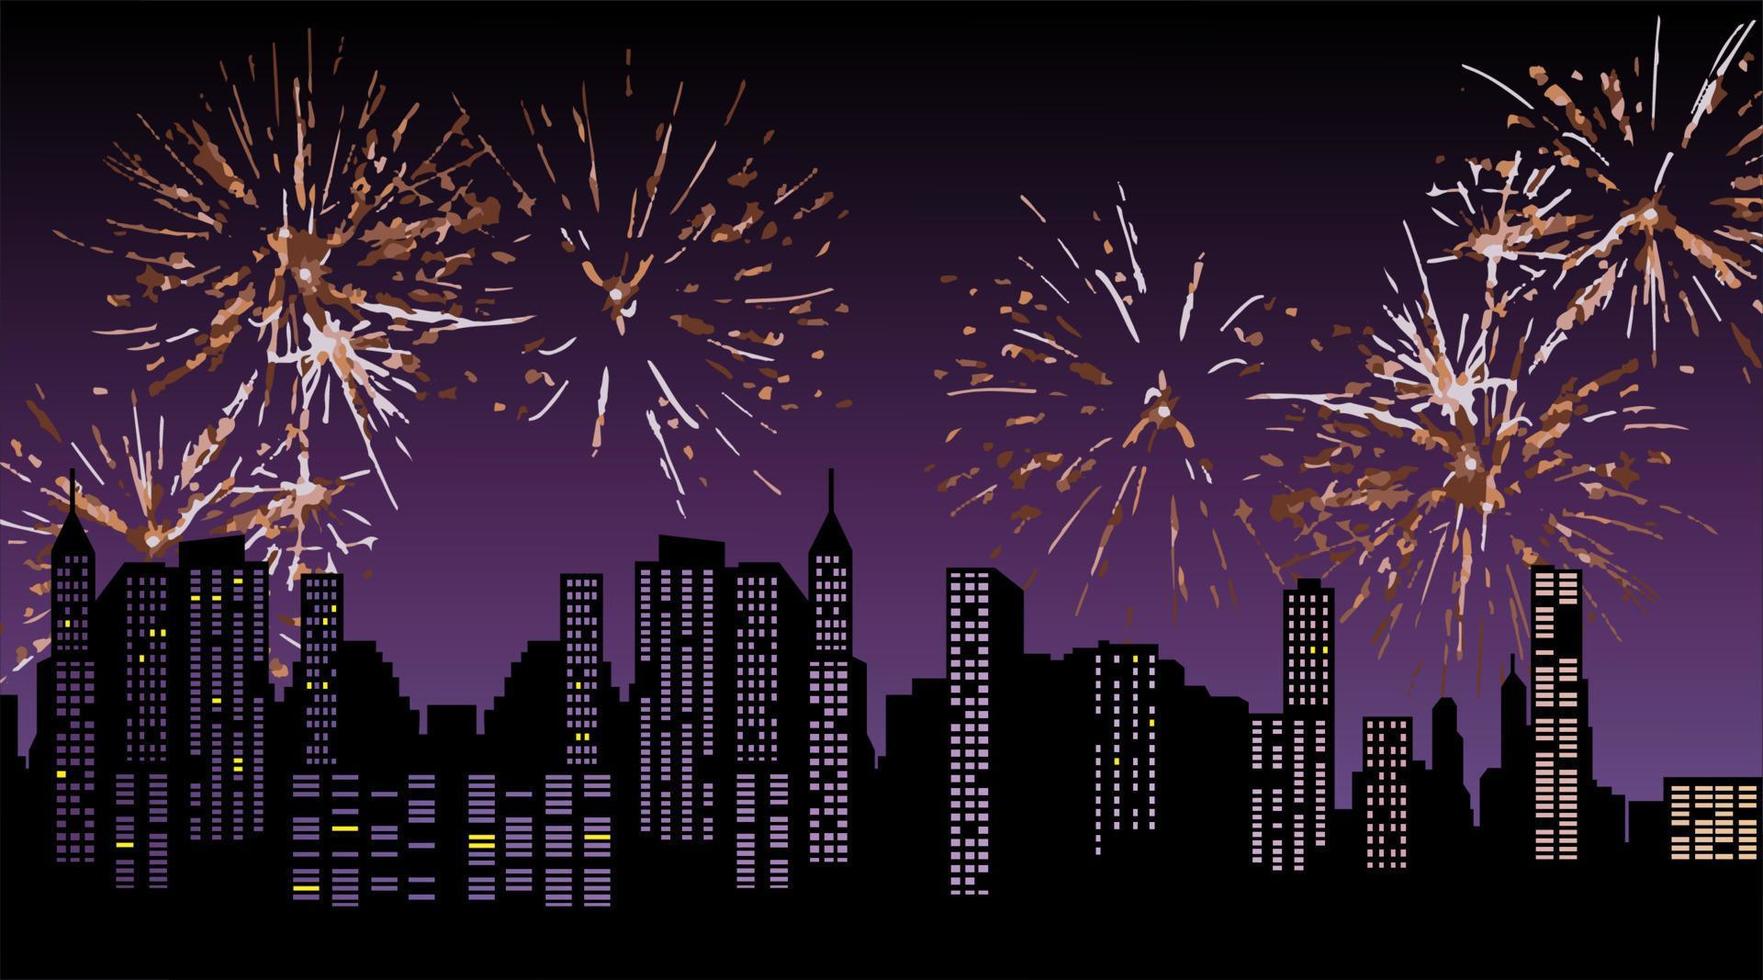 New Years' Eve Background Scene with City Skyline and Fireworks. Vector Illustration